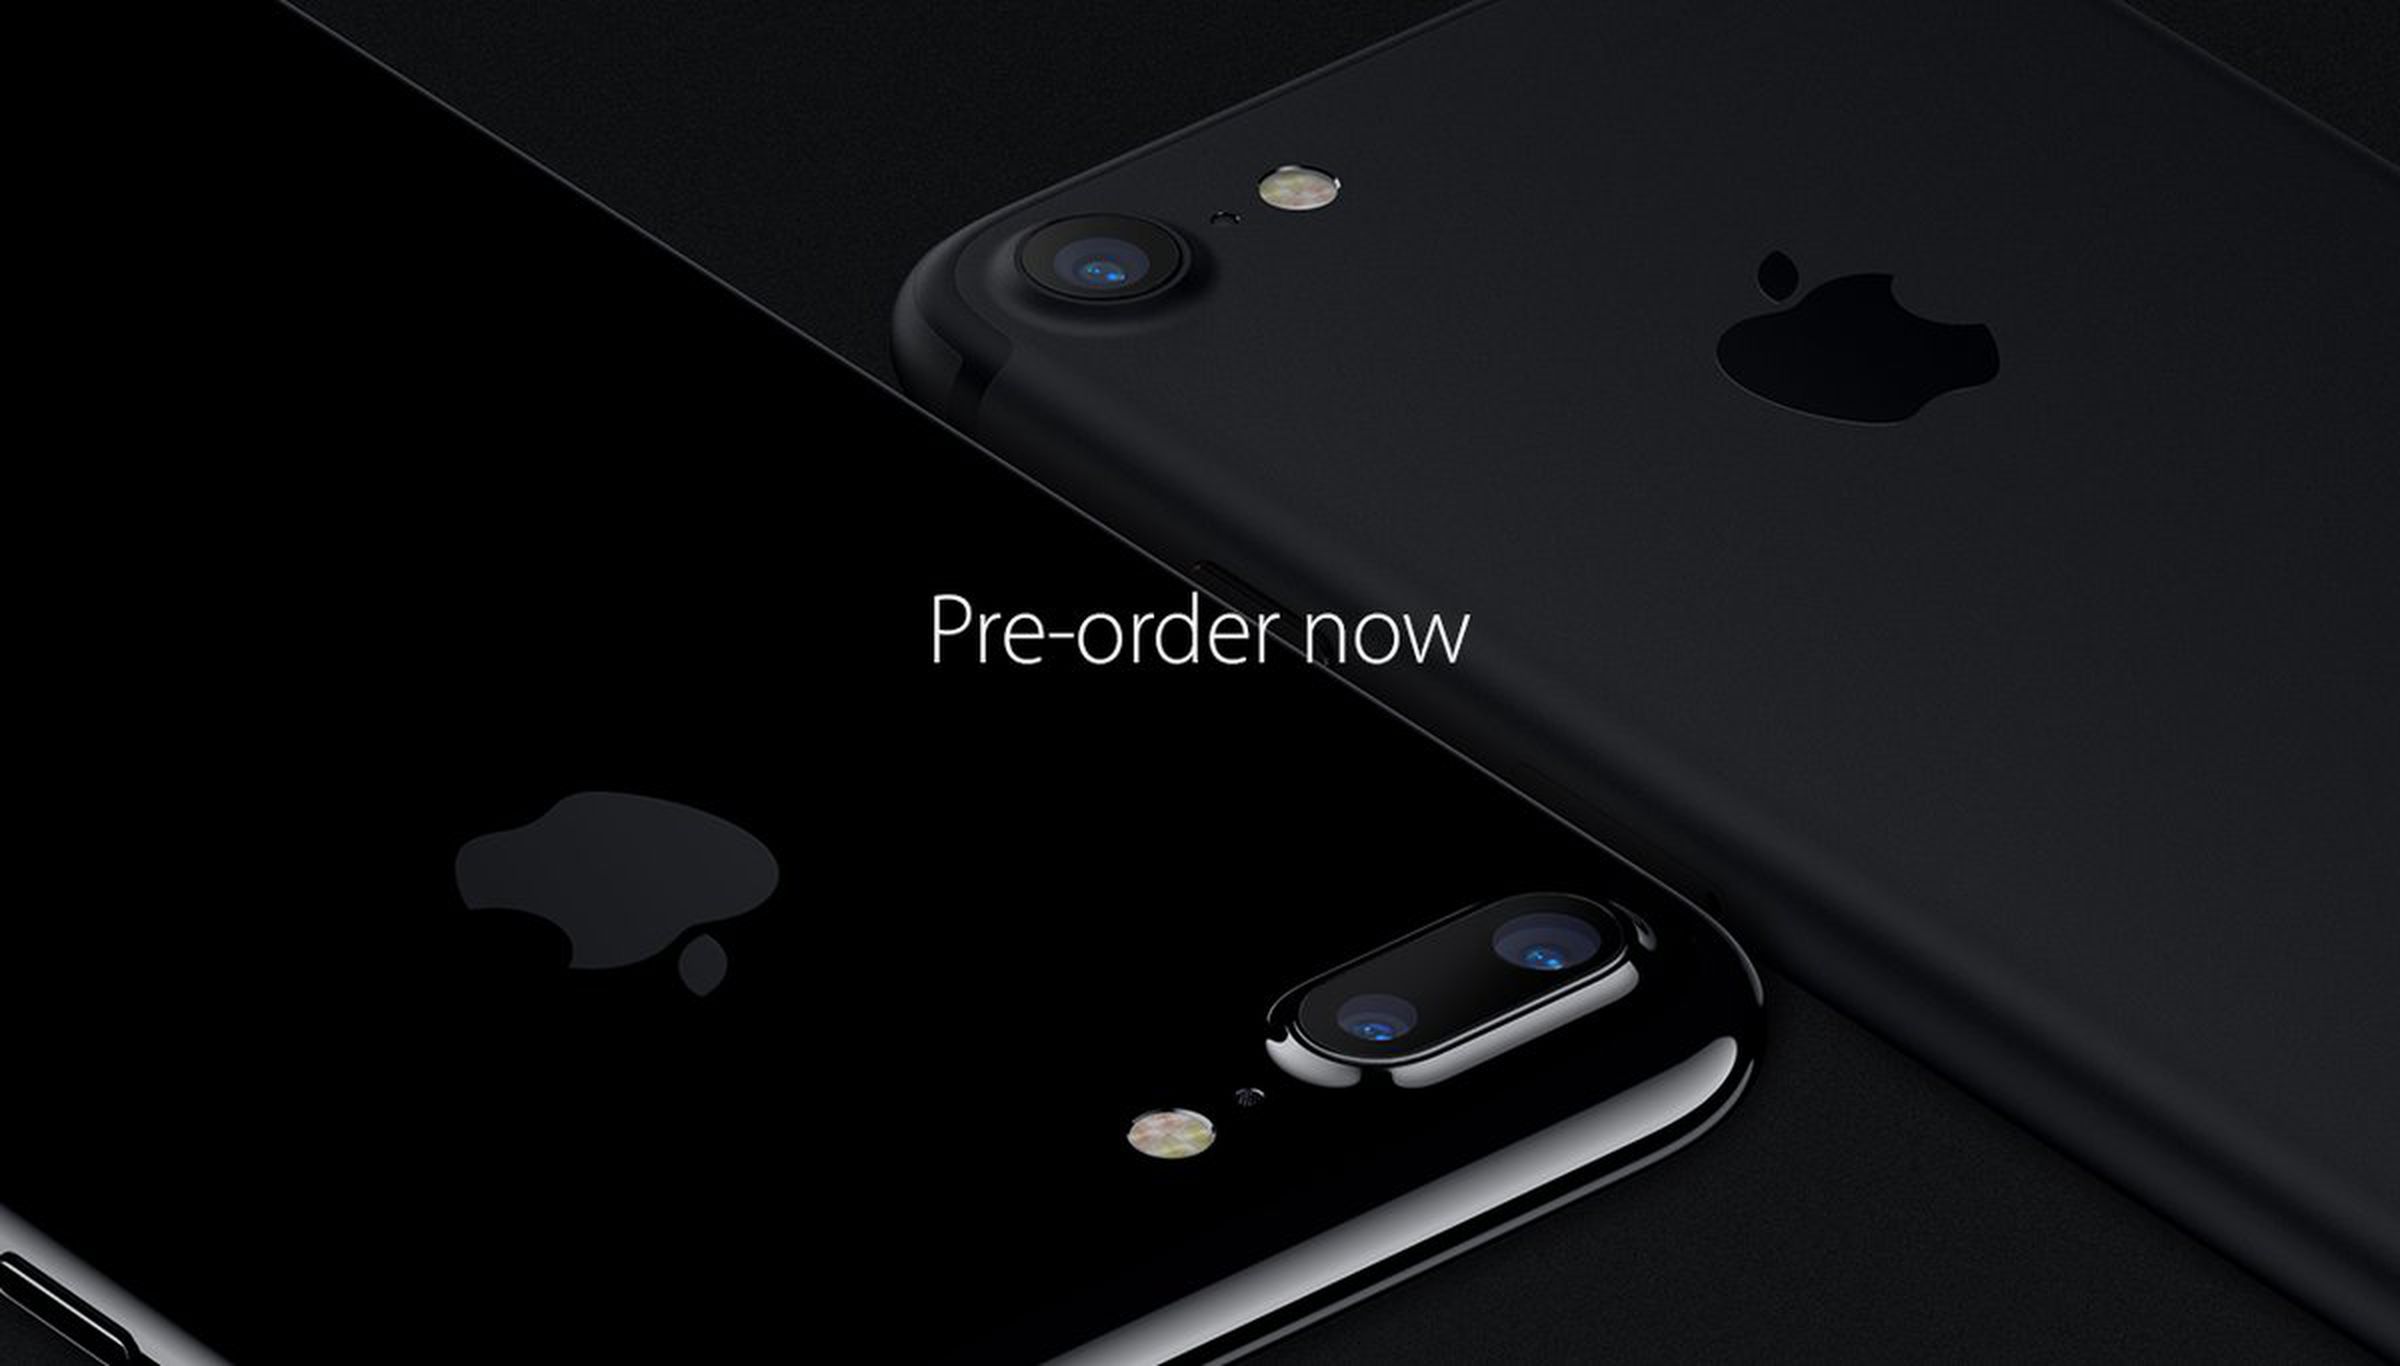 iPhone 7 preorder